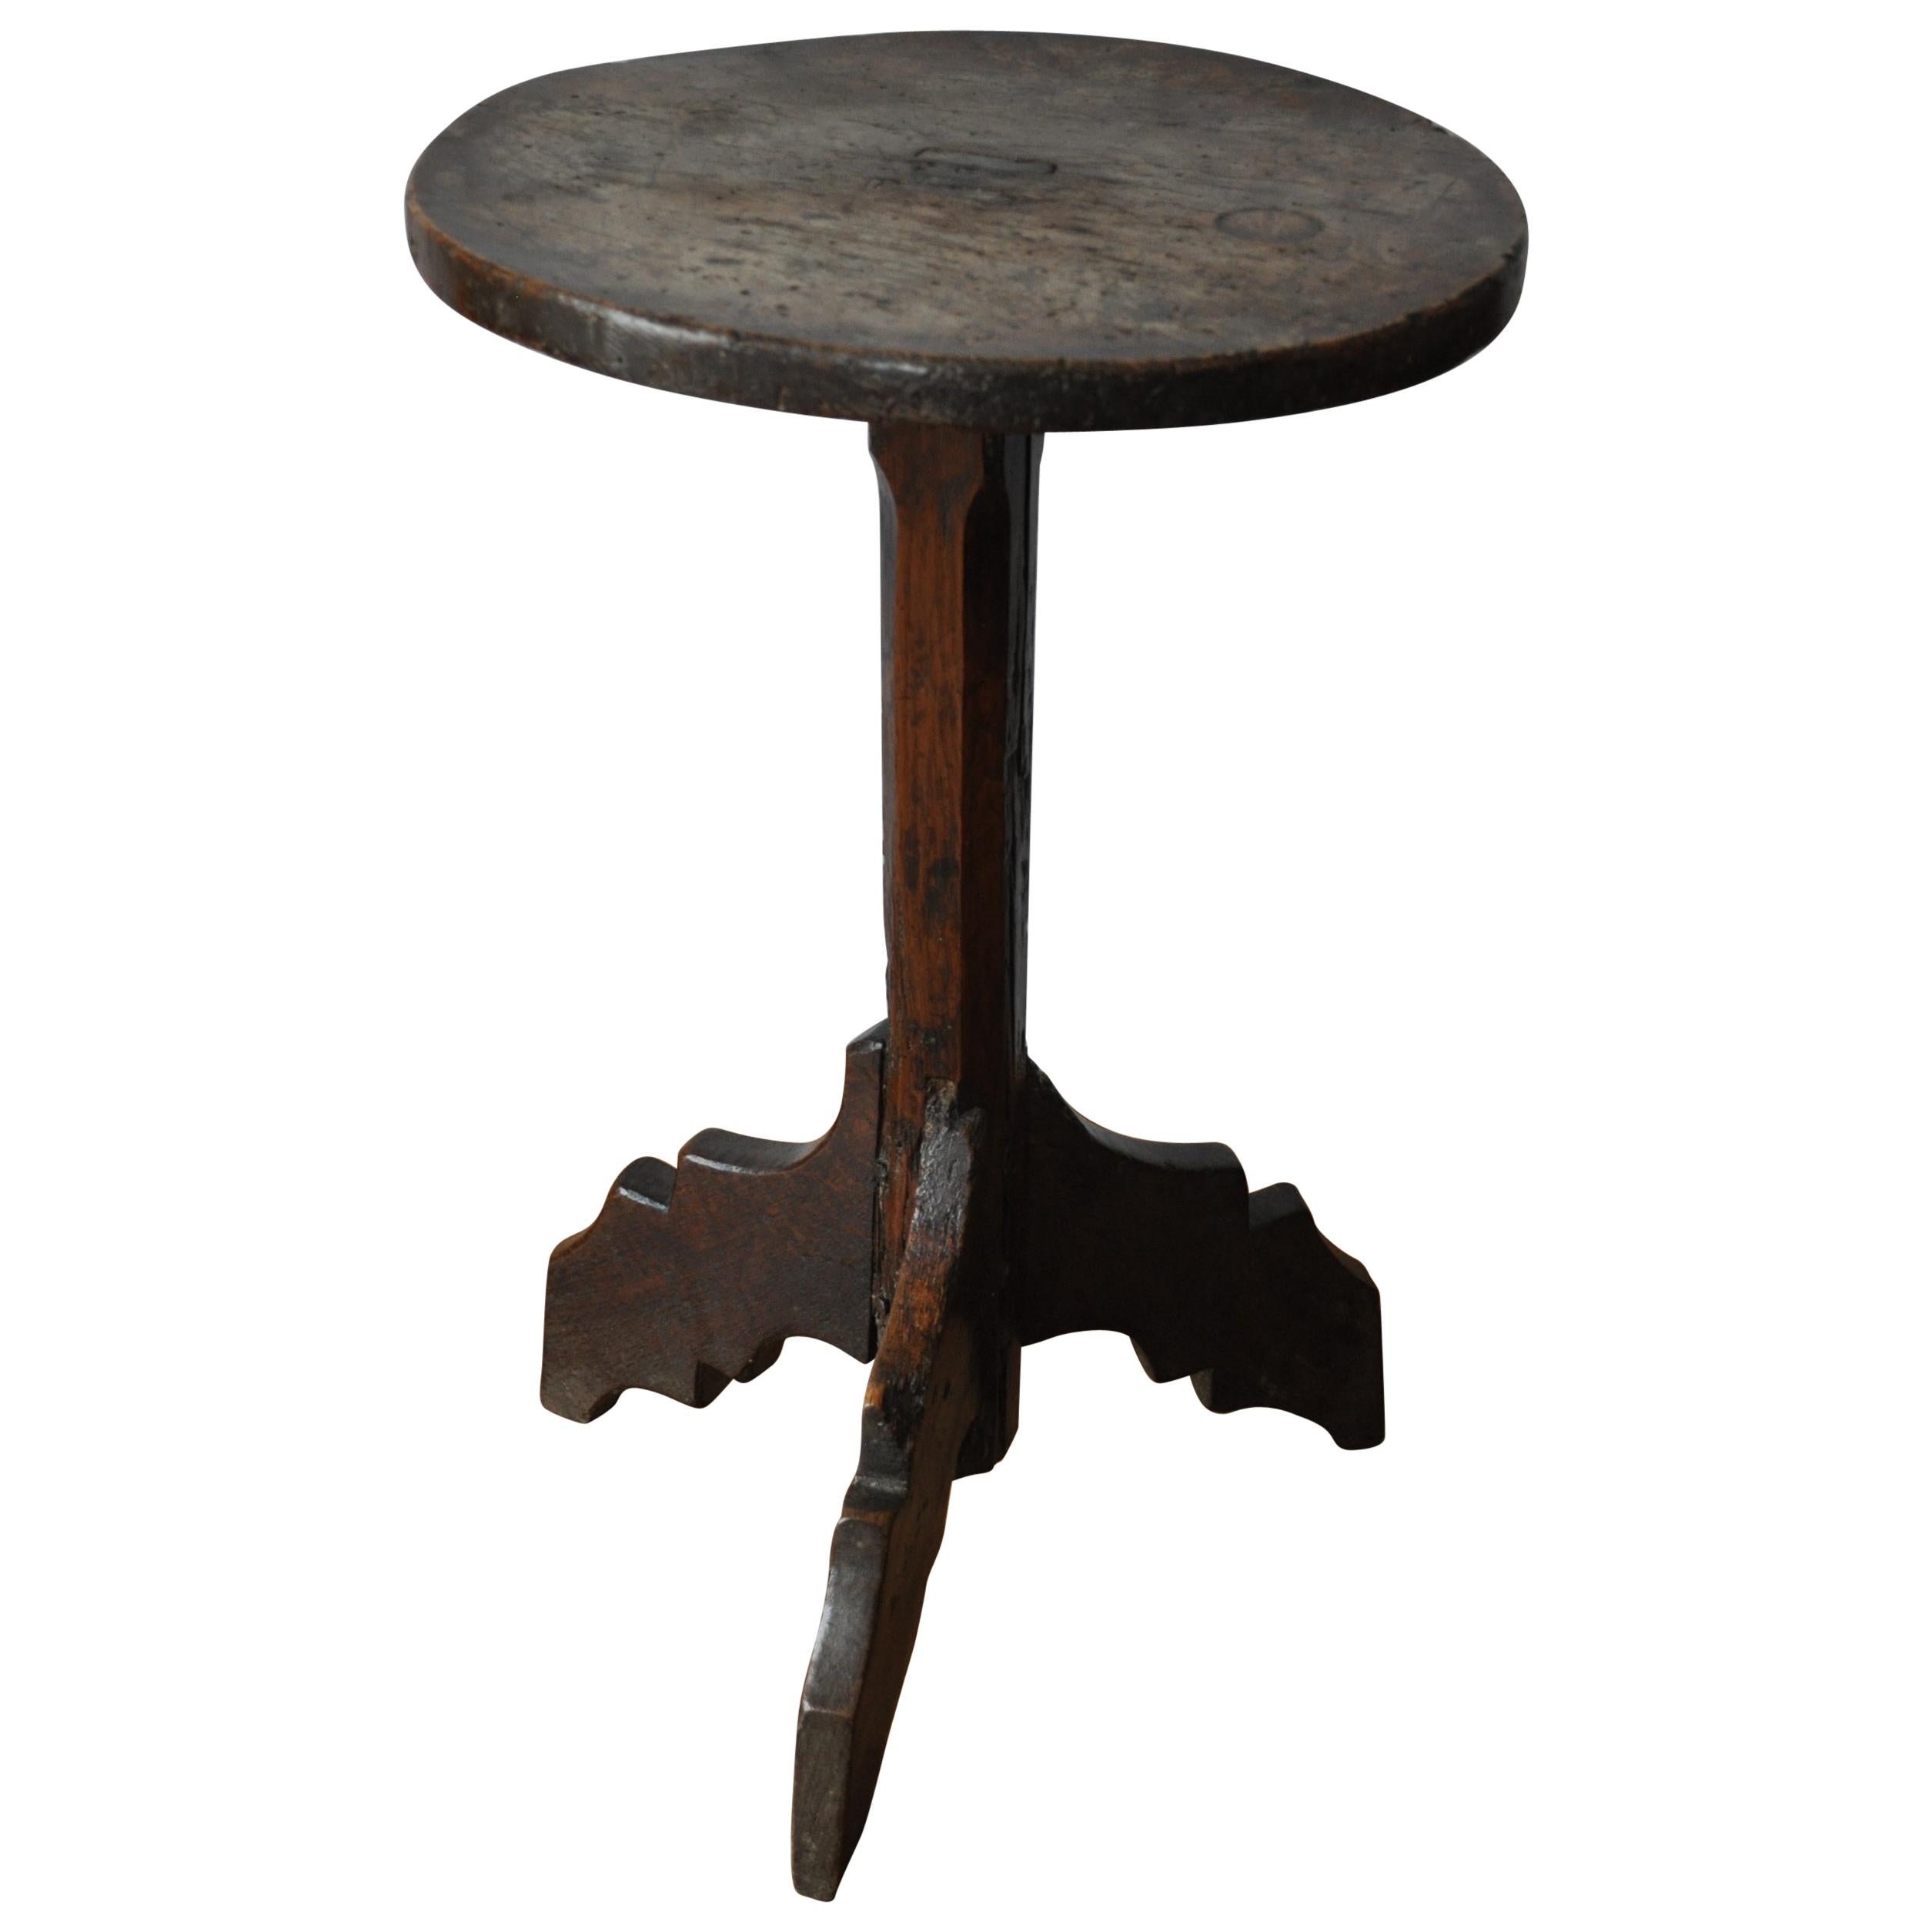 Rare antique French Haute Époque 16th century walnut Tripod Table / candle stand For Sale